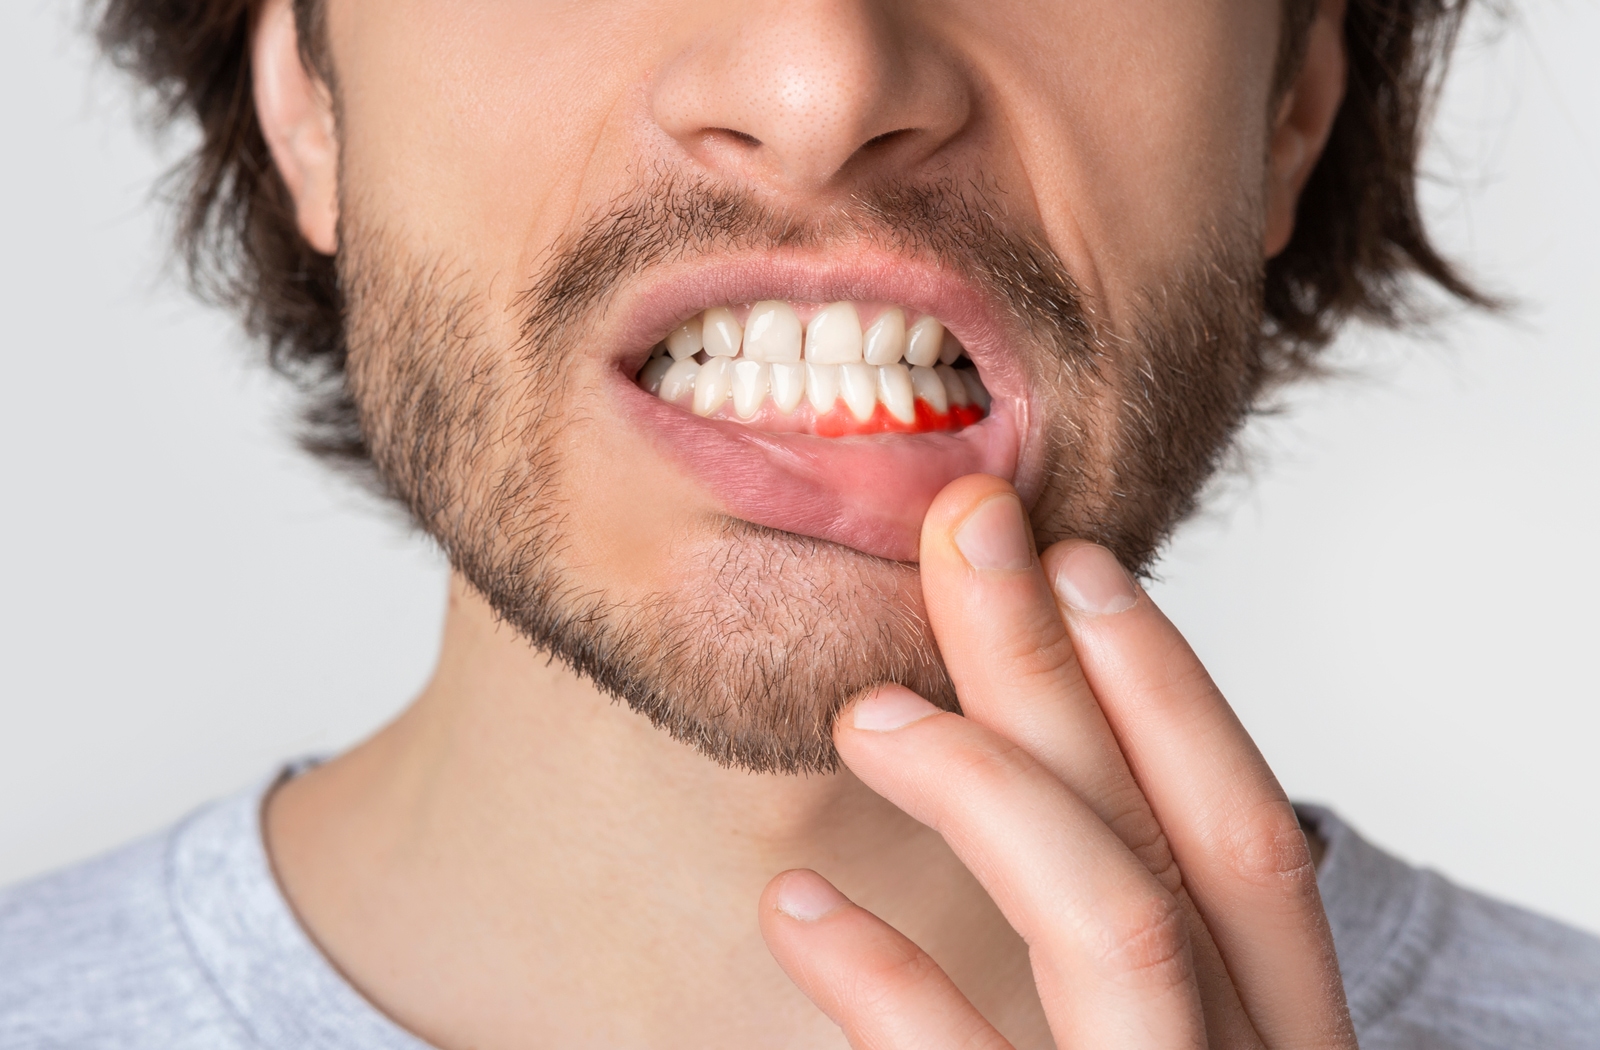 Man pulling back his lip to show the redness from his infected gum